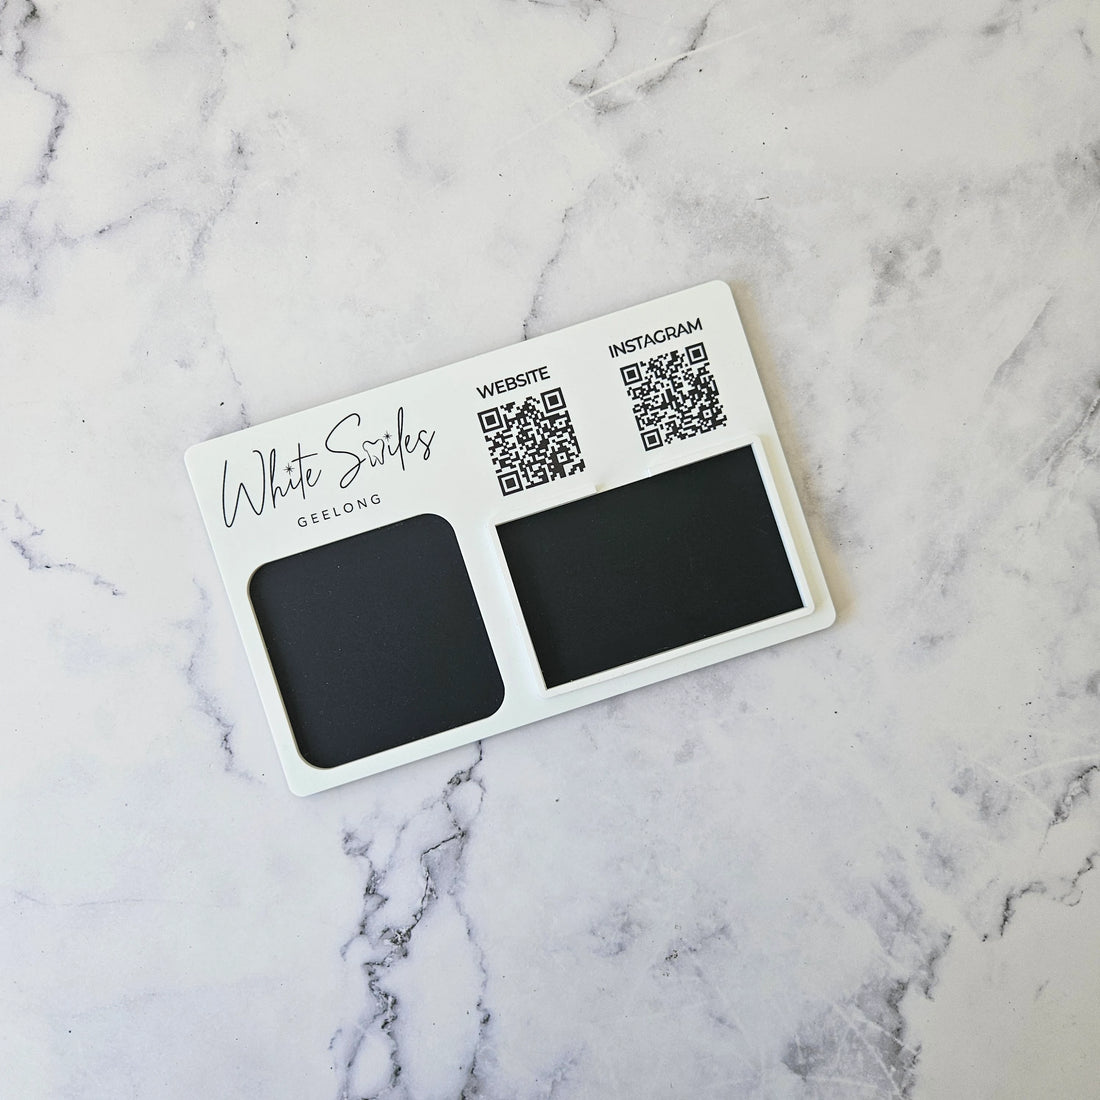 Flat Square Reader Dock with Business Card Holder and QR Codes, White Acrylic with Black Logo